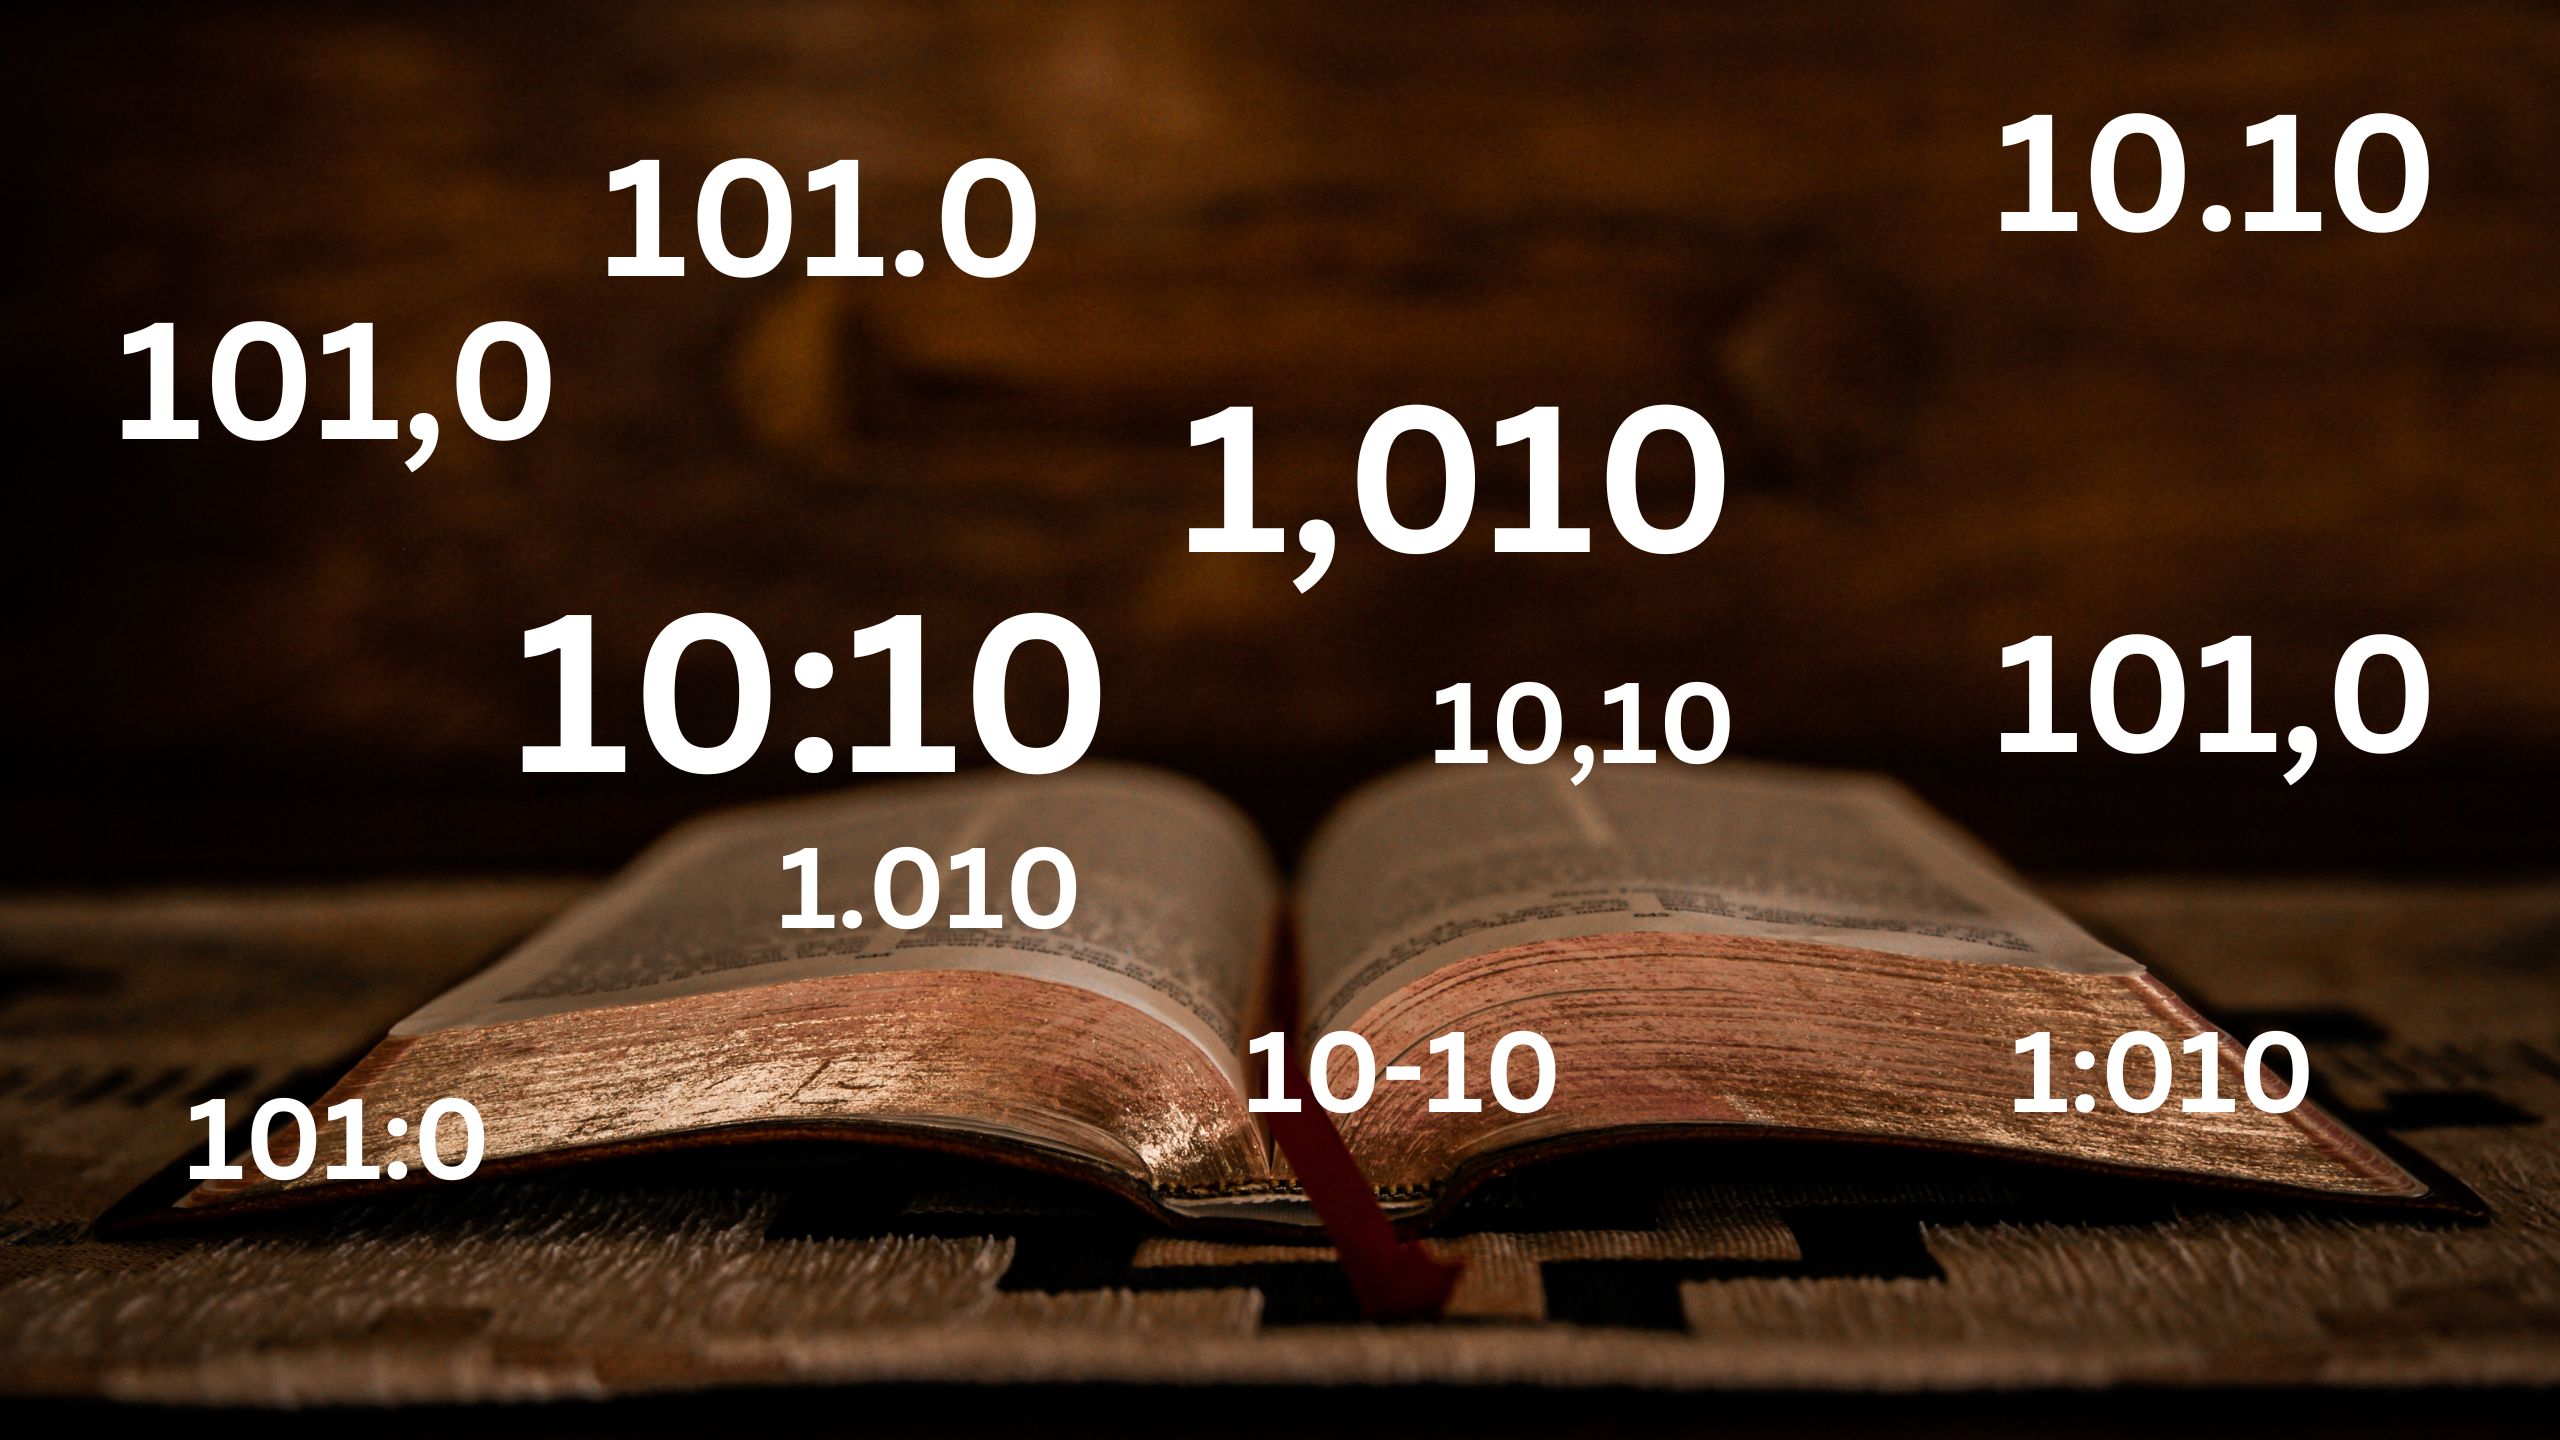 1010 meaning in bible